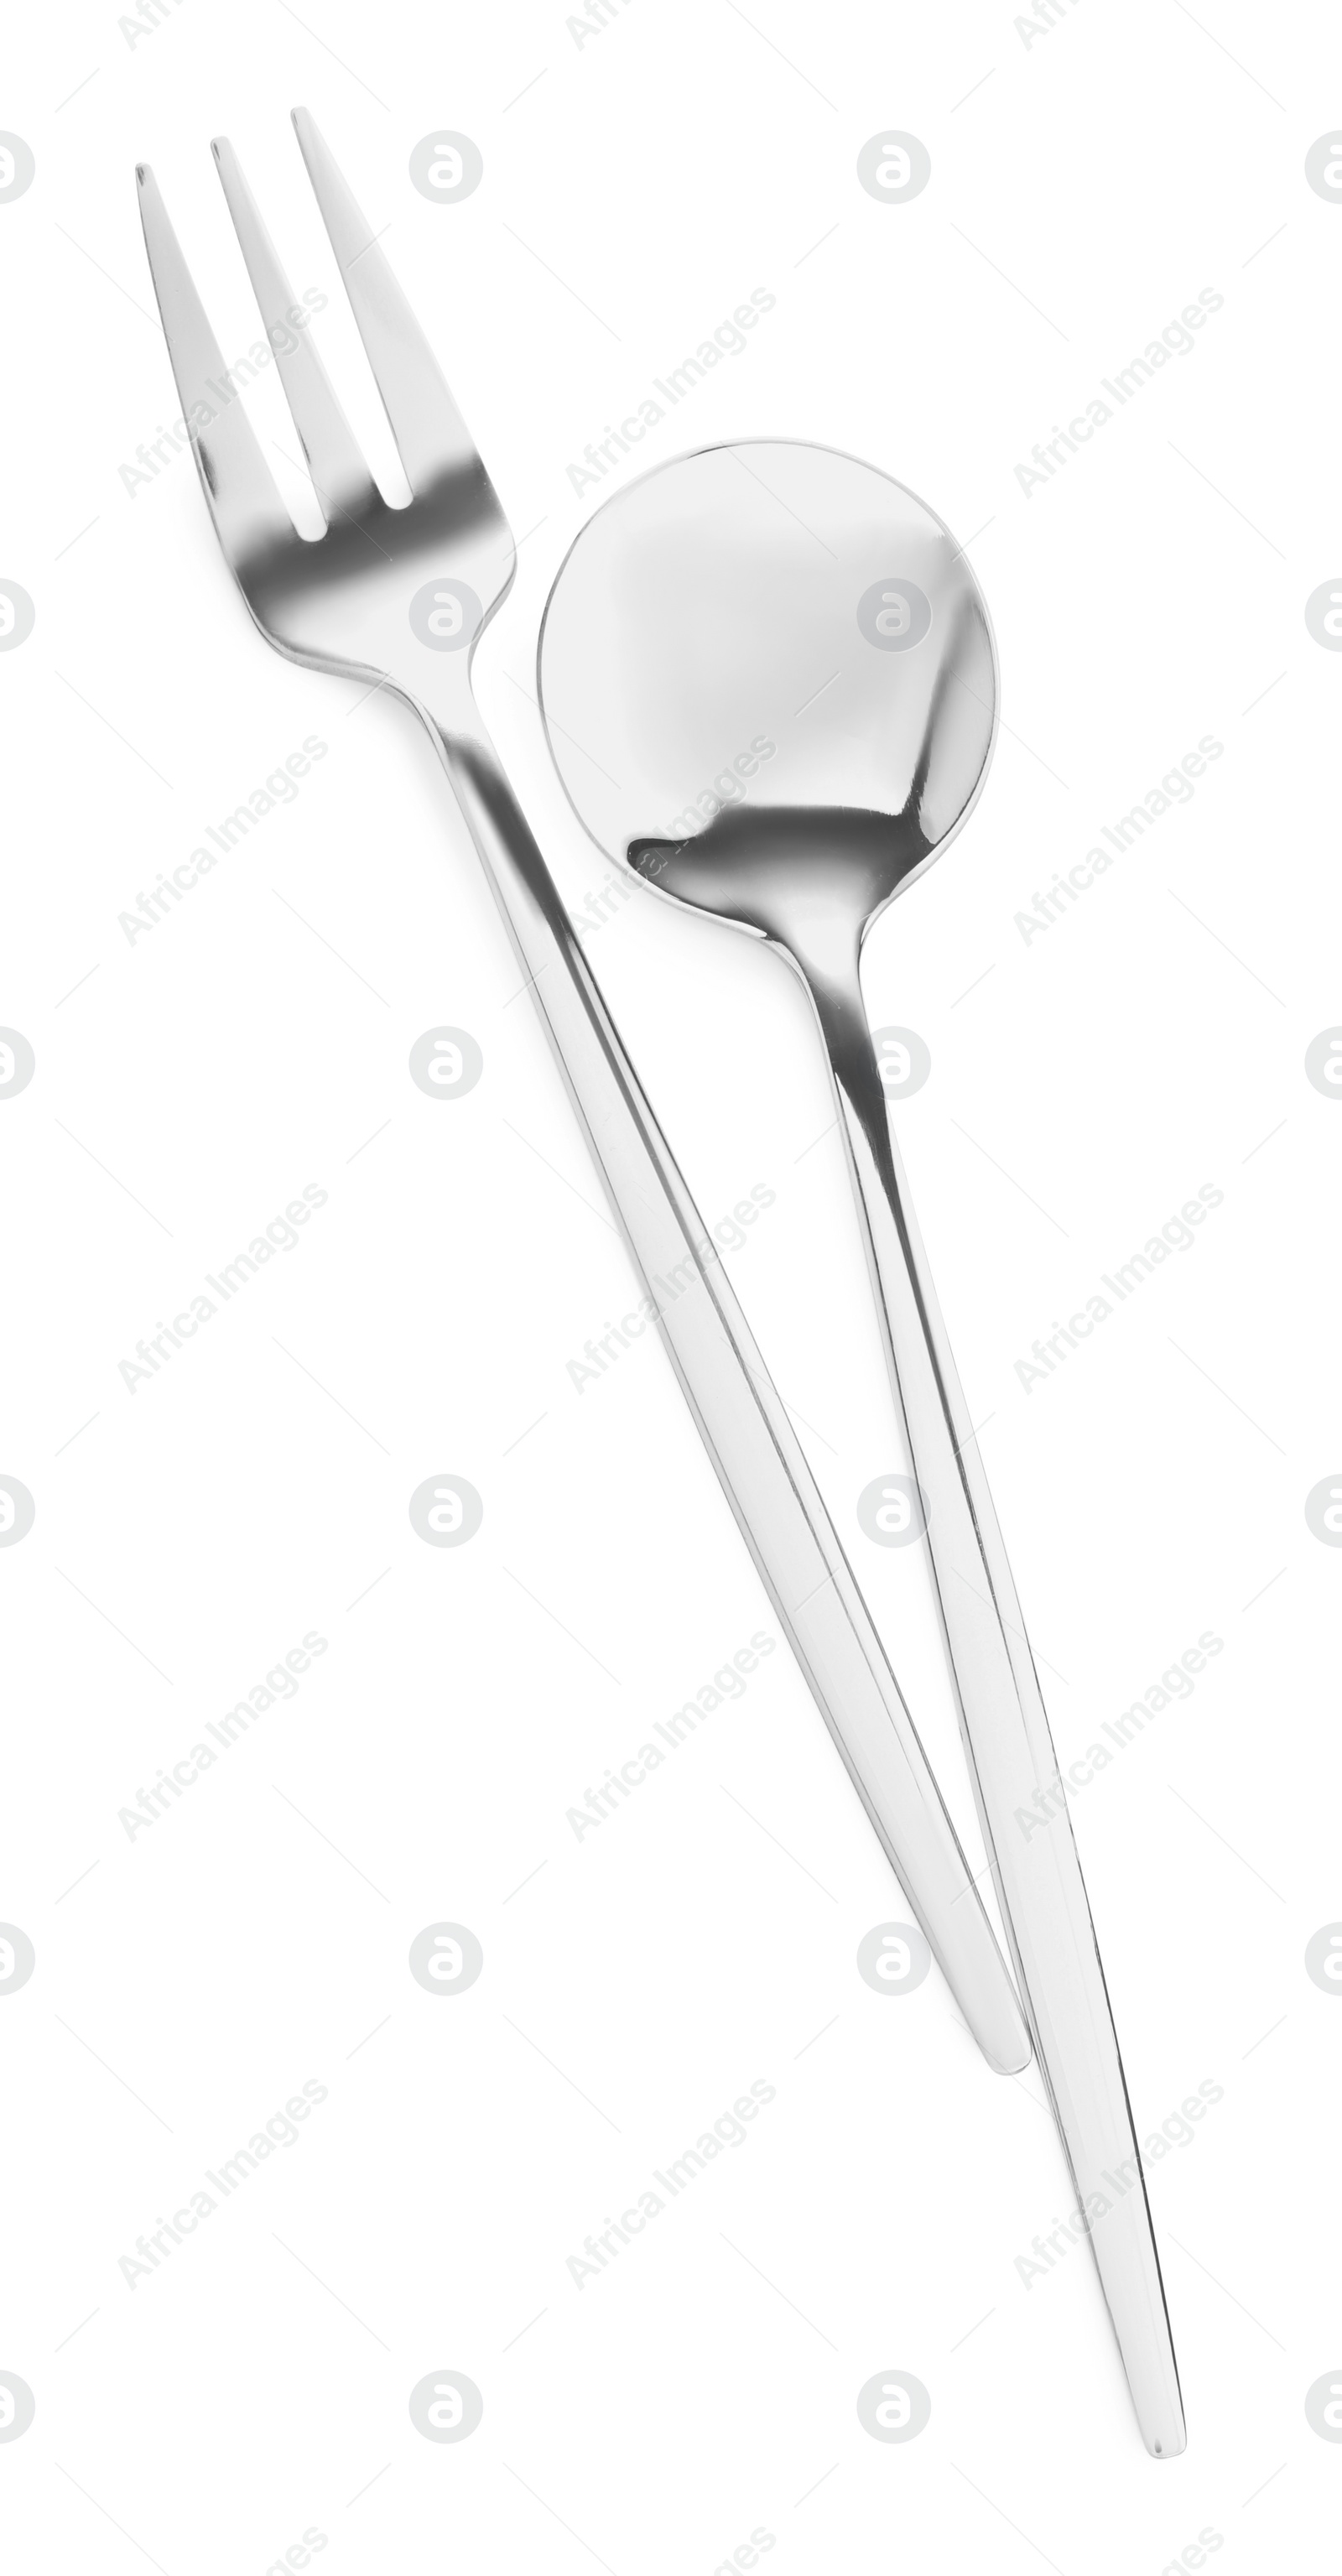 Photo of Spoon and fork isolated on white, top view. Stylish shiny cutlery set